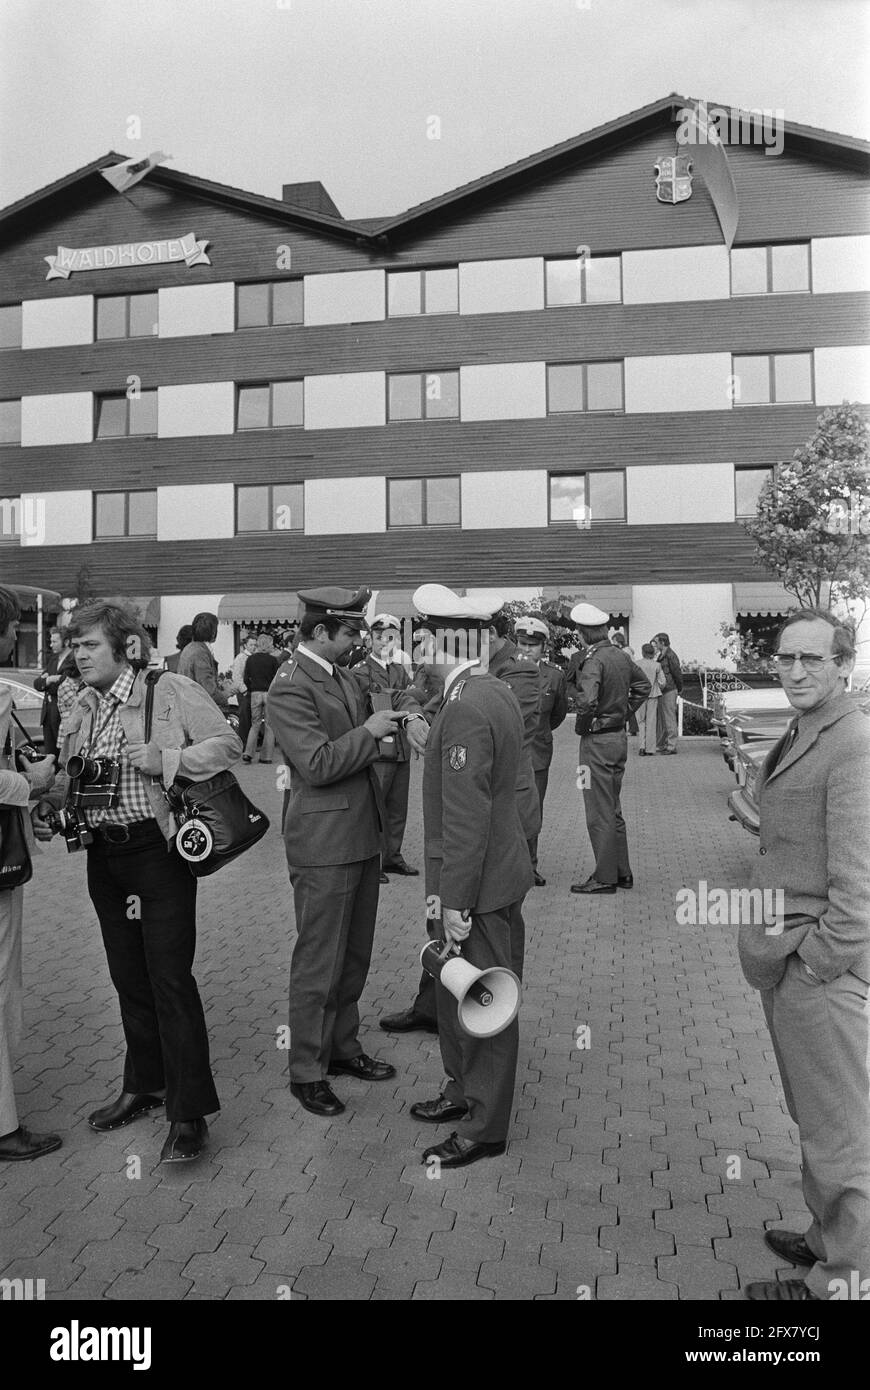 Arrival Dutch national team in Hiltrup ( West Germany ) World Cup soccer 1974; guard at hotel, June 12, 1974, security, teams, hotels, sports, soccer, The Netherlands, 20th century press agency photo, news to remember, documentary, historic photography 1945-1990, visual stories, human history of the Twentieth Century, capturing moments in time Stock Photo